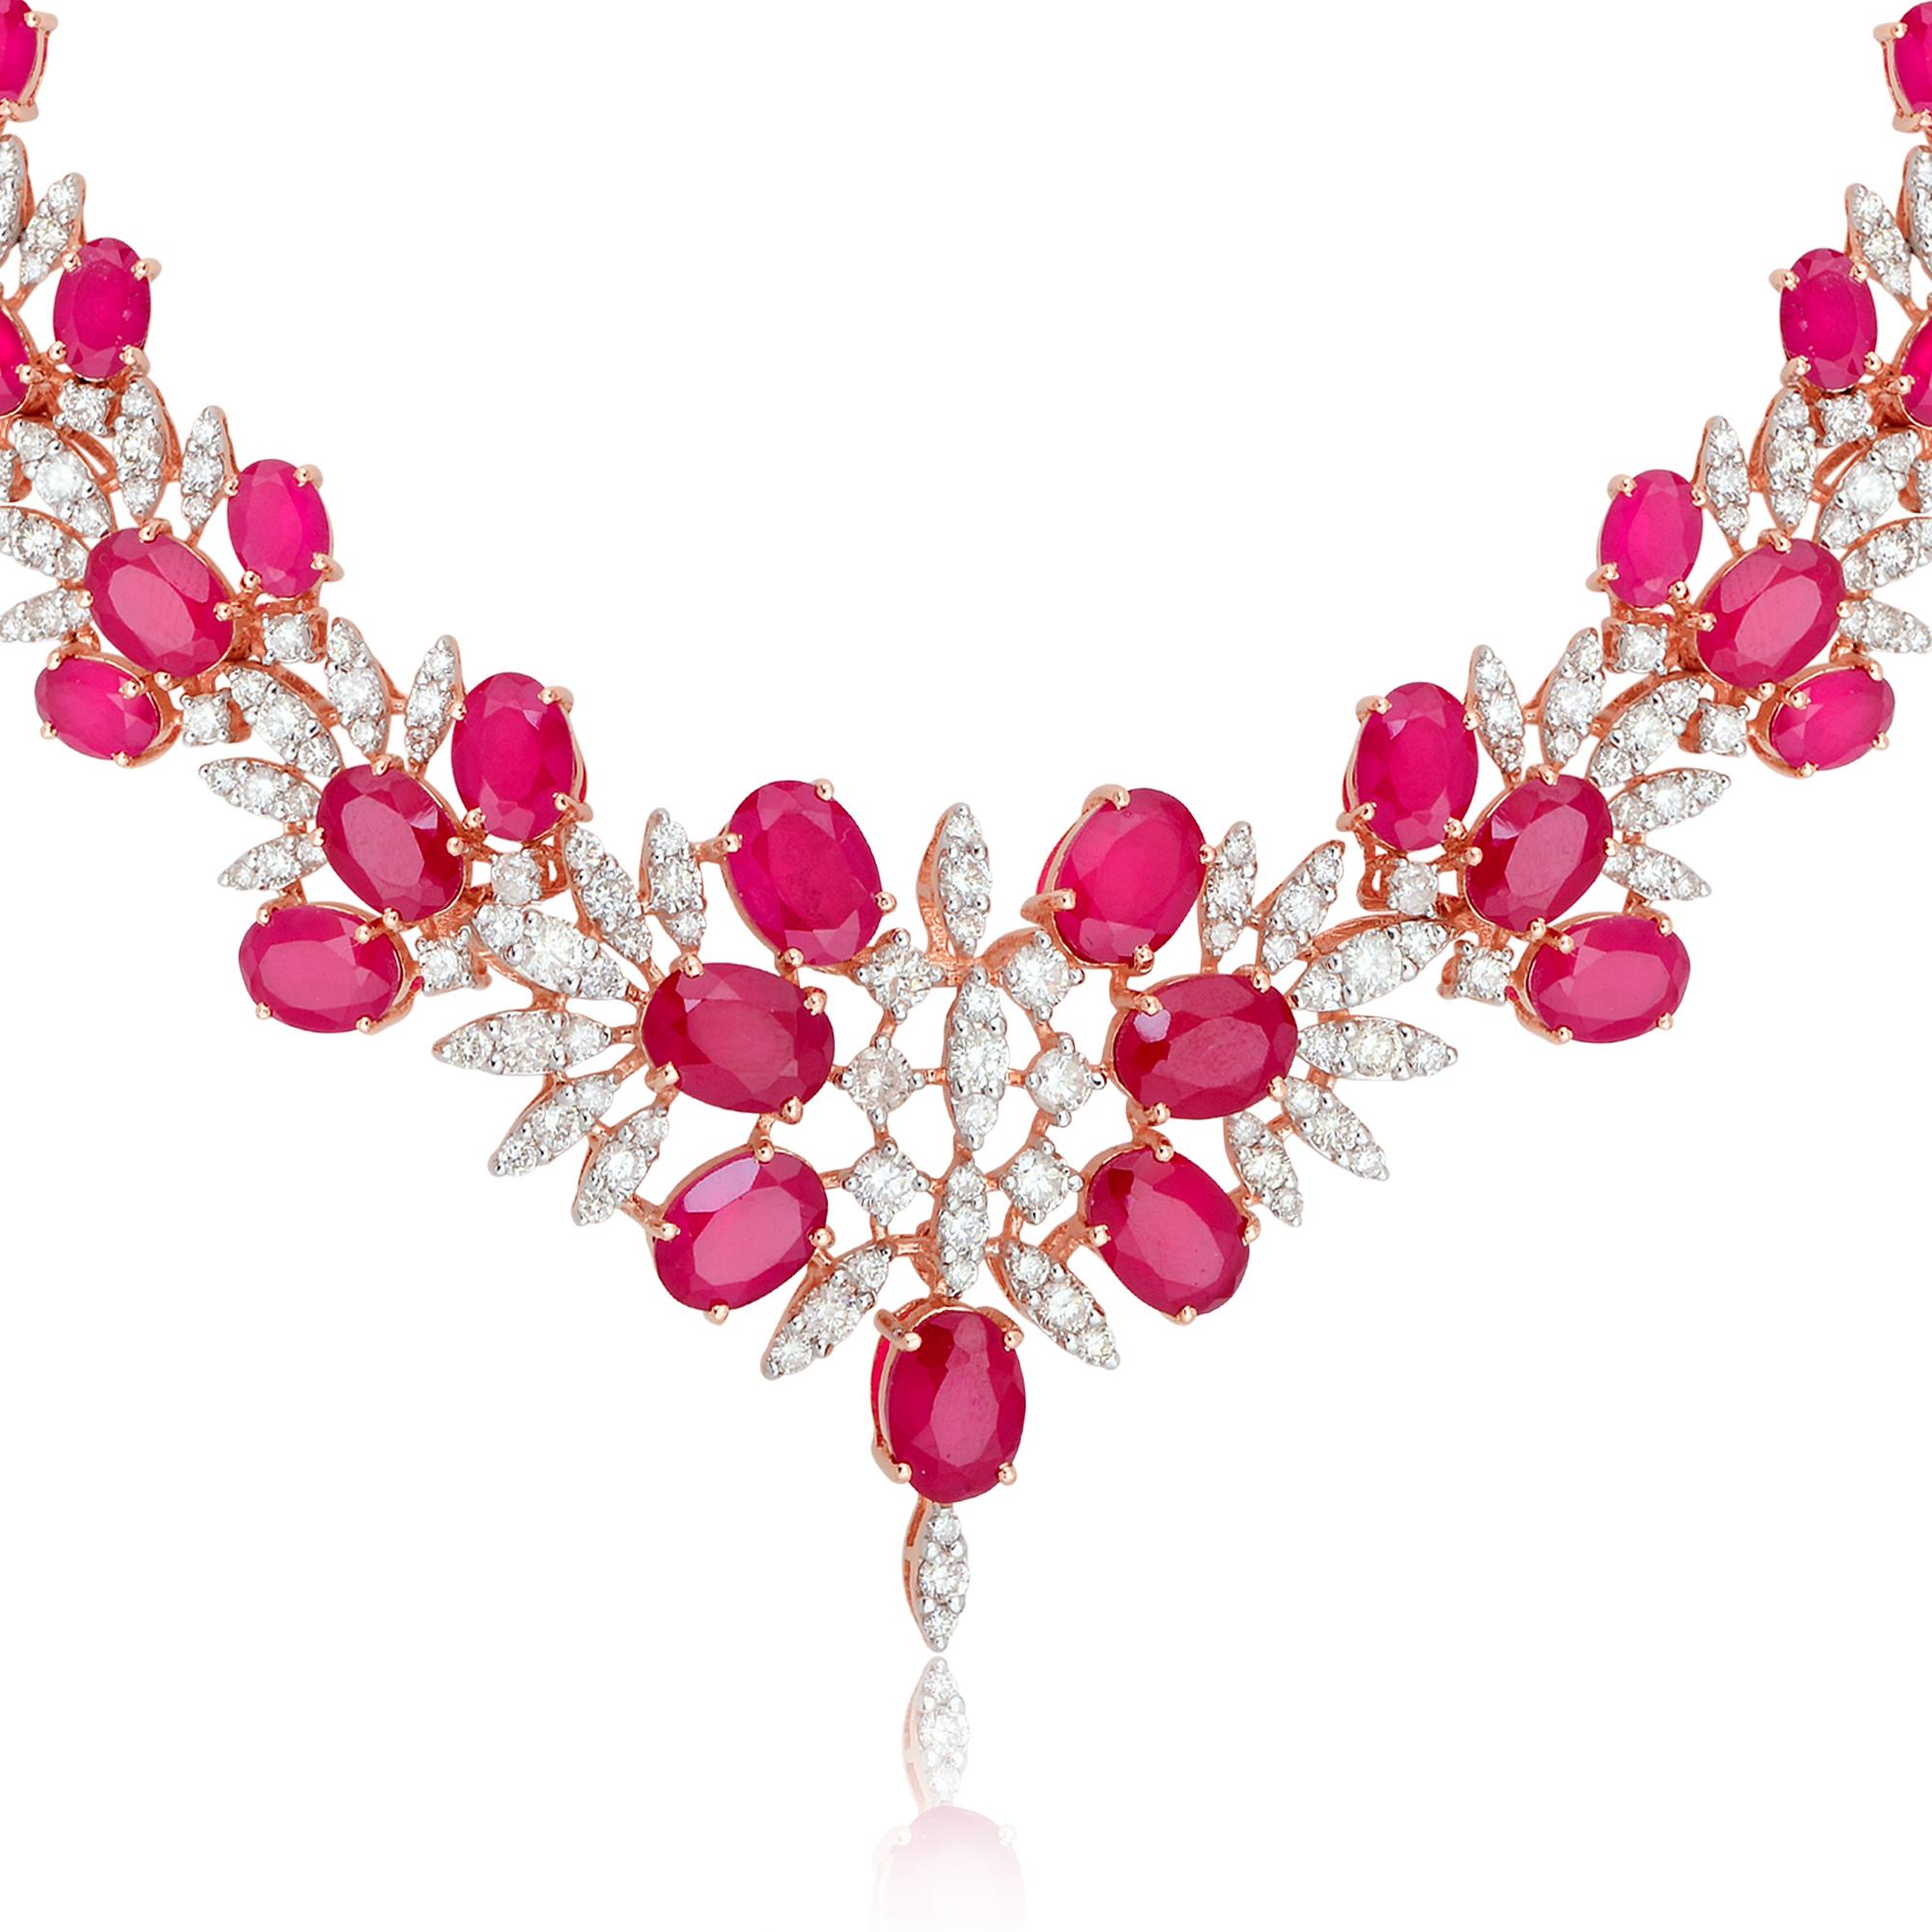 Enhancing the ruby's allure are the pave diamonds that grace the necklace. These delicate diamonds are intricately set in a continuous pattern, creating a sparkling halo effect that beautifully accentuates the ruby. Their exceptional quality and